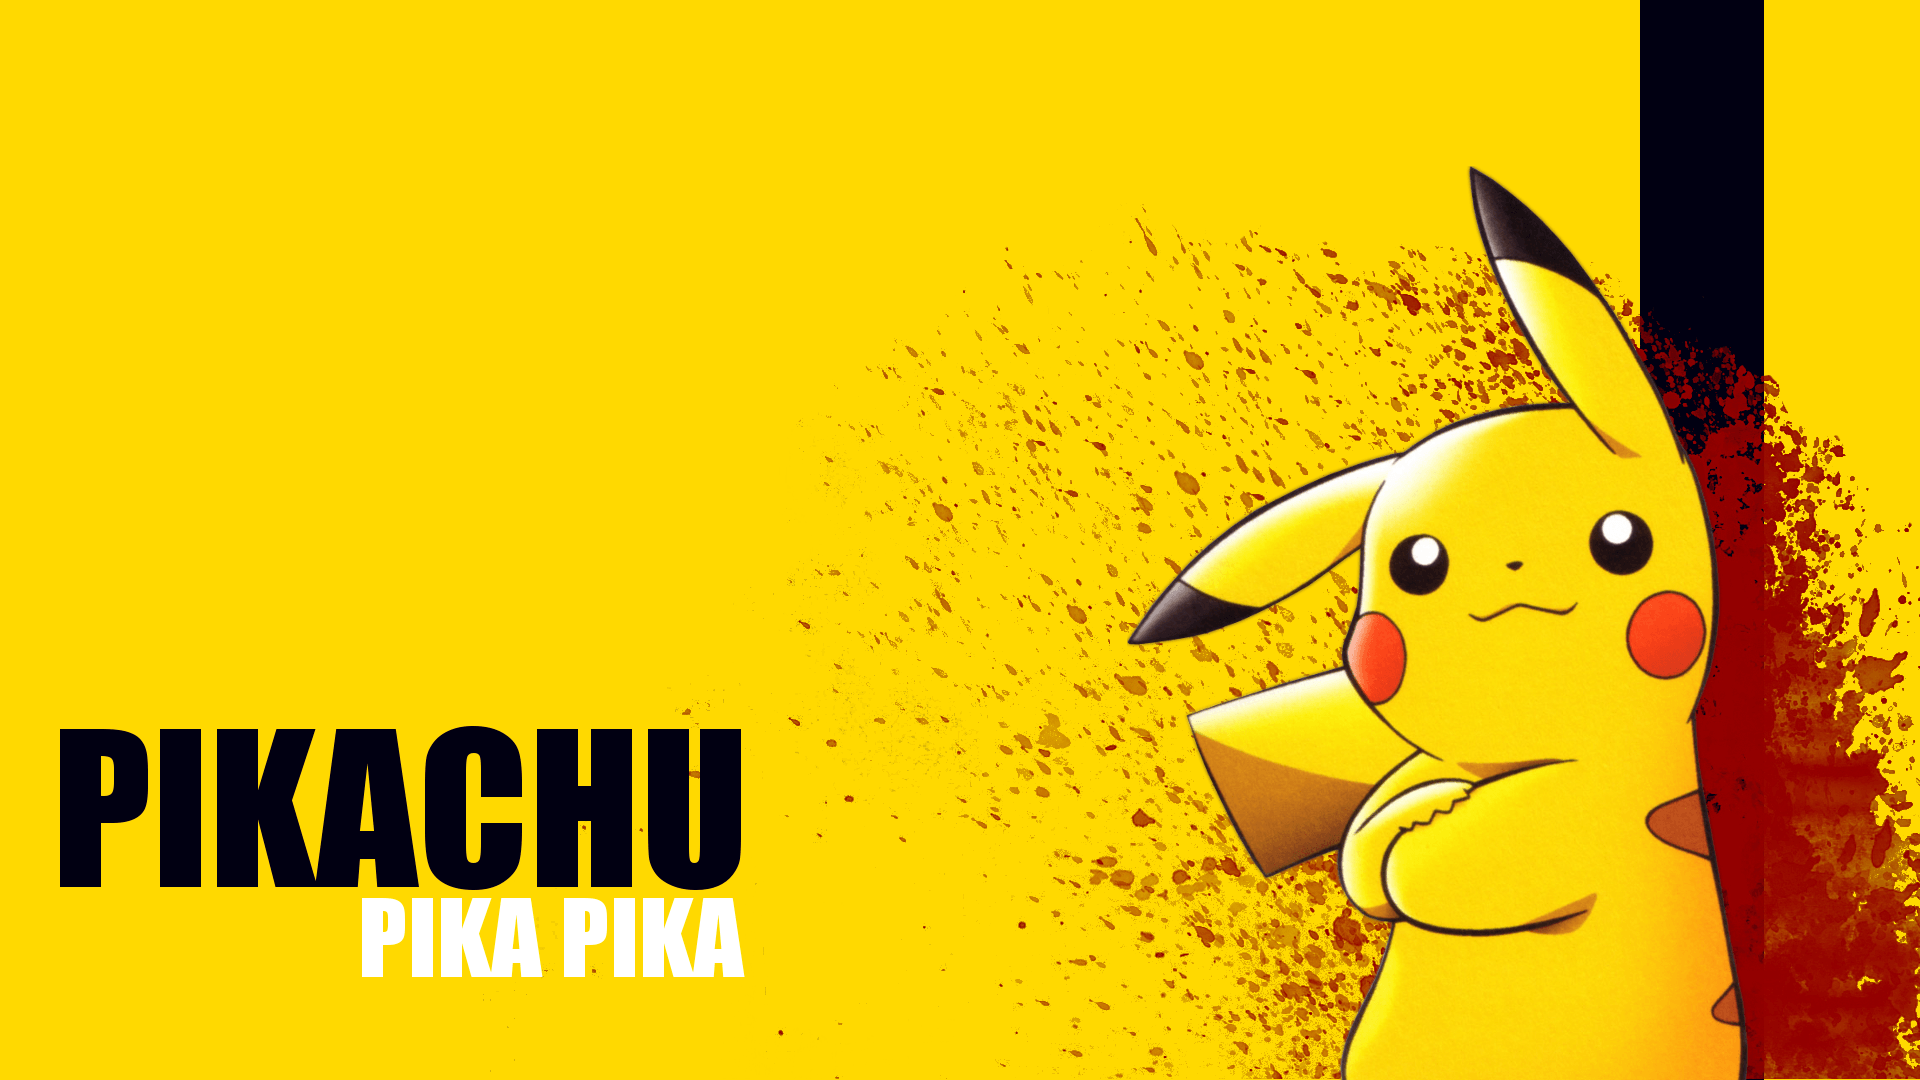 Desktop Full HD Pikachu Picture On Cutest Image Fully High